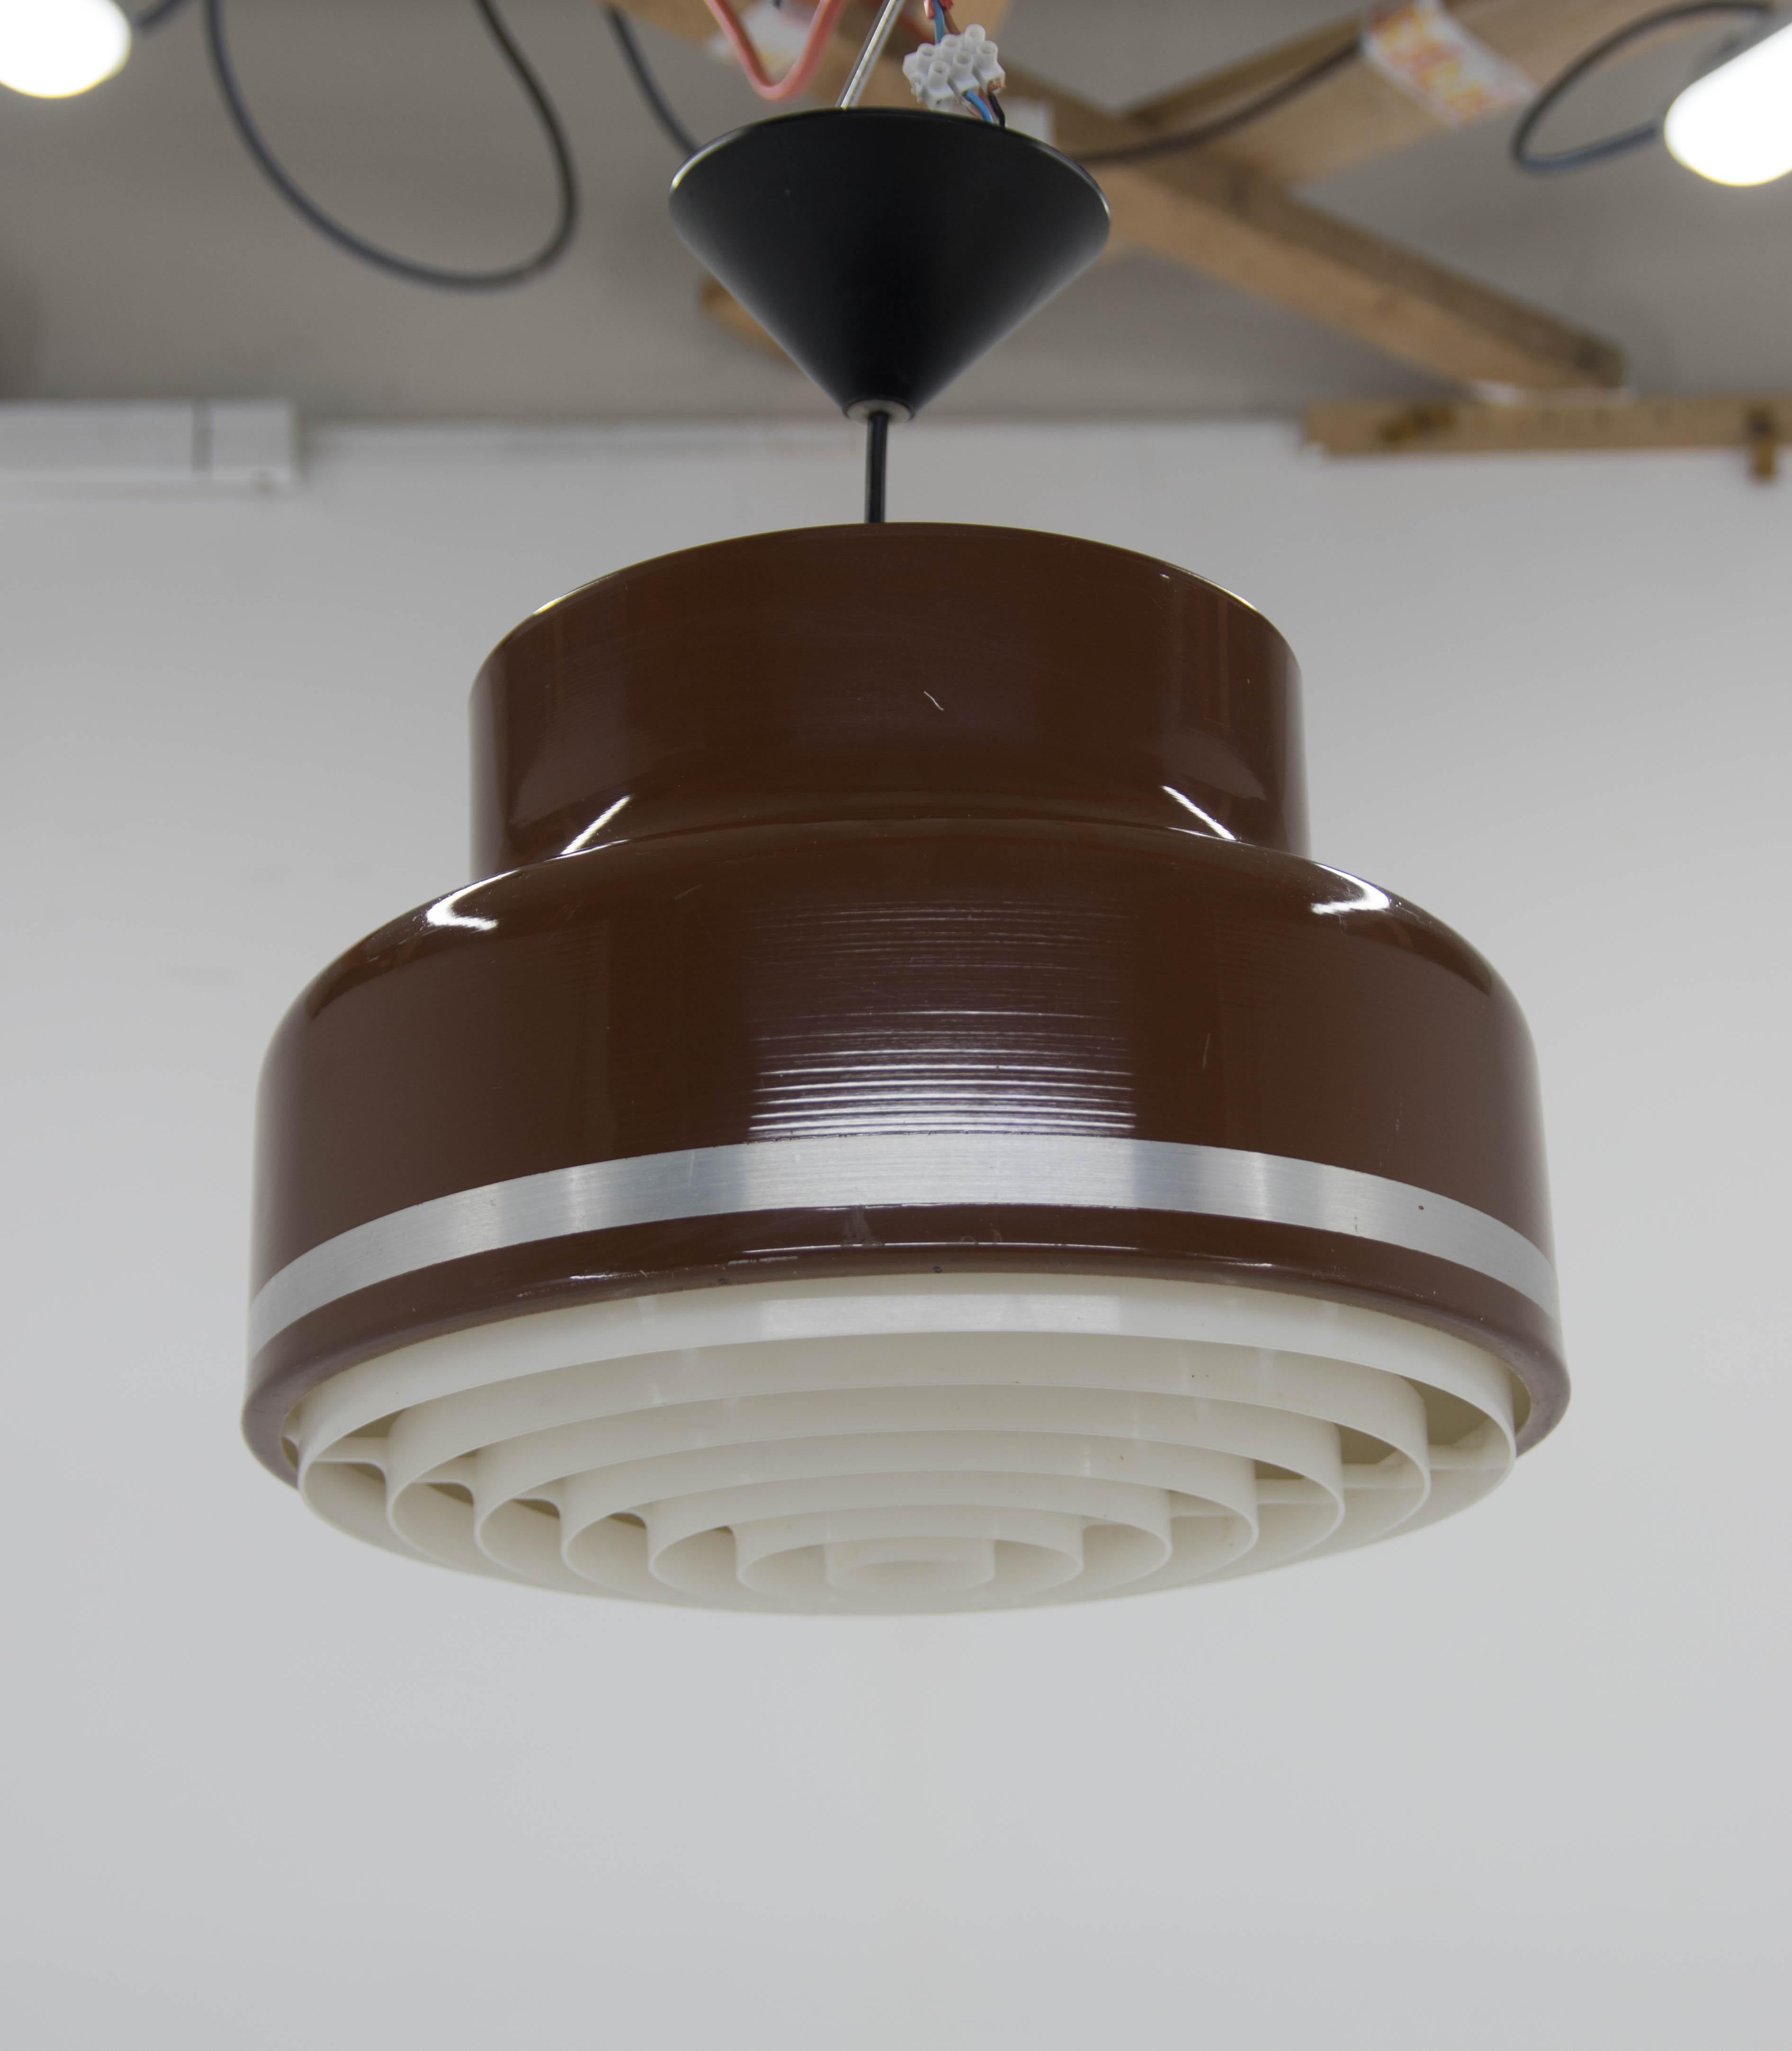 Design pendant made of brown painted metal and plastic.
Made in Czechoslovakia in 1970s
Rewired: 1x60W, E25-E27 bulb
US wiring compatible.